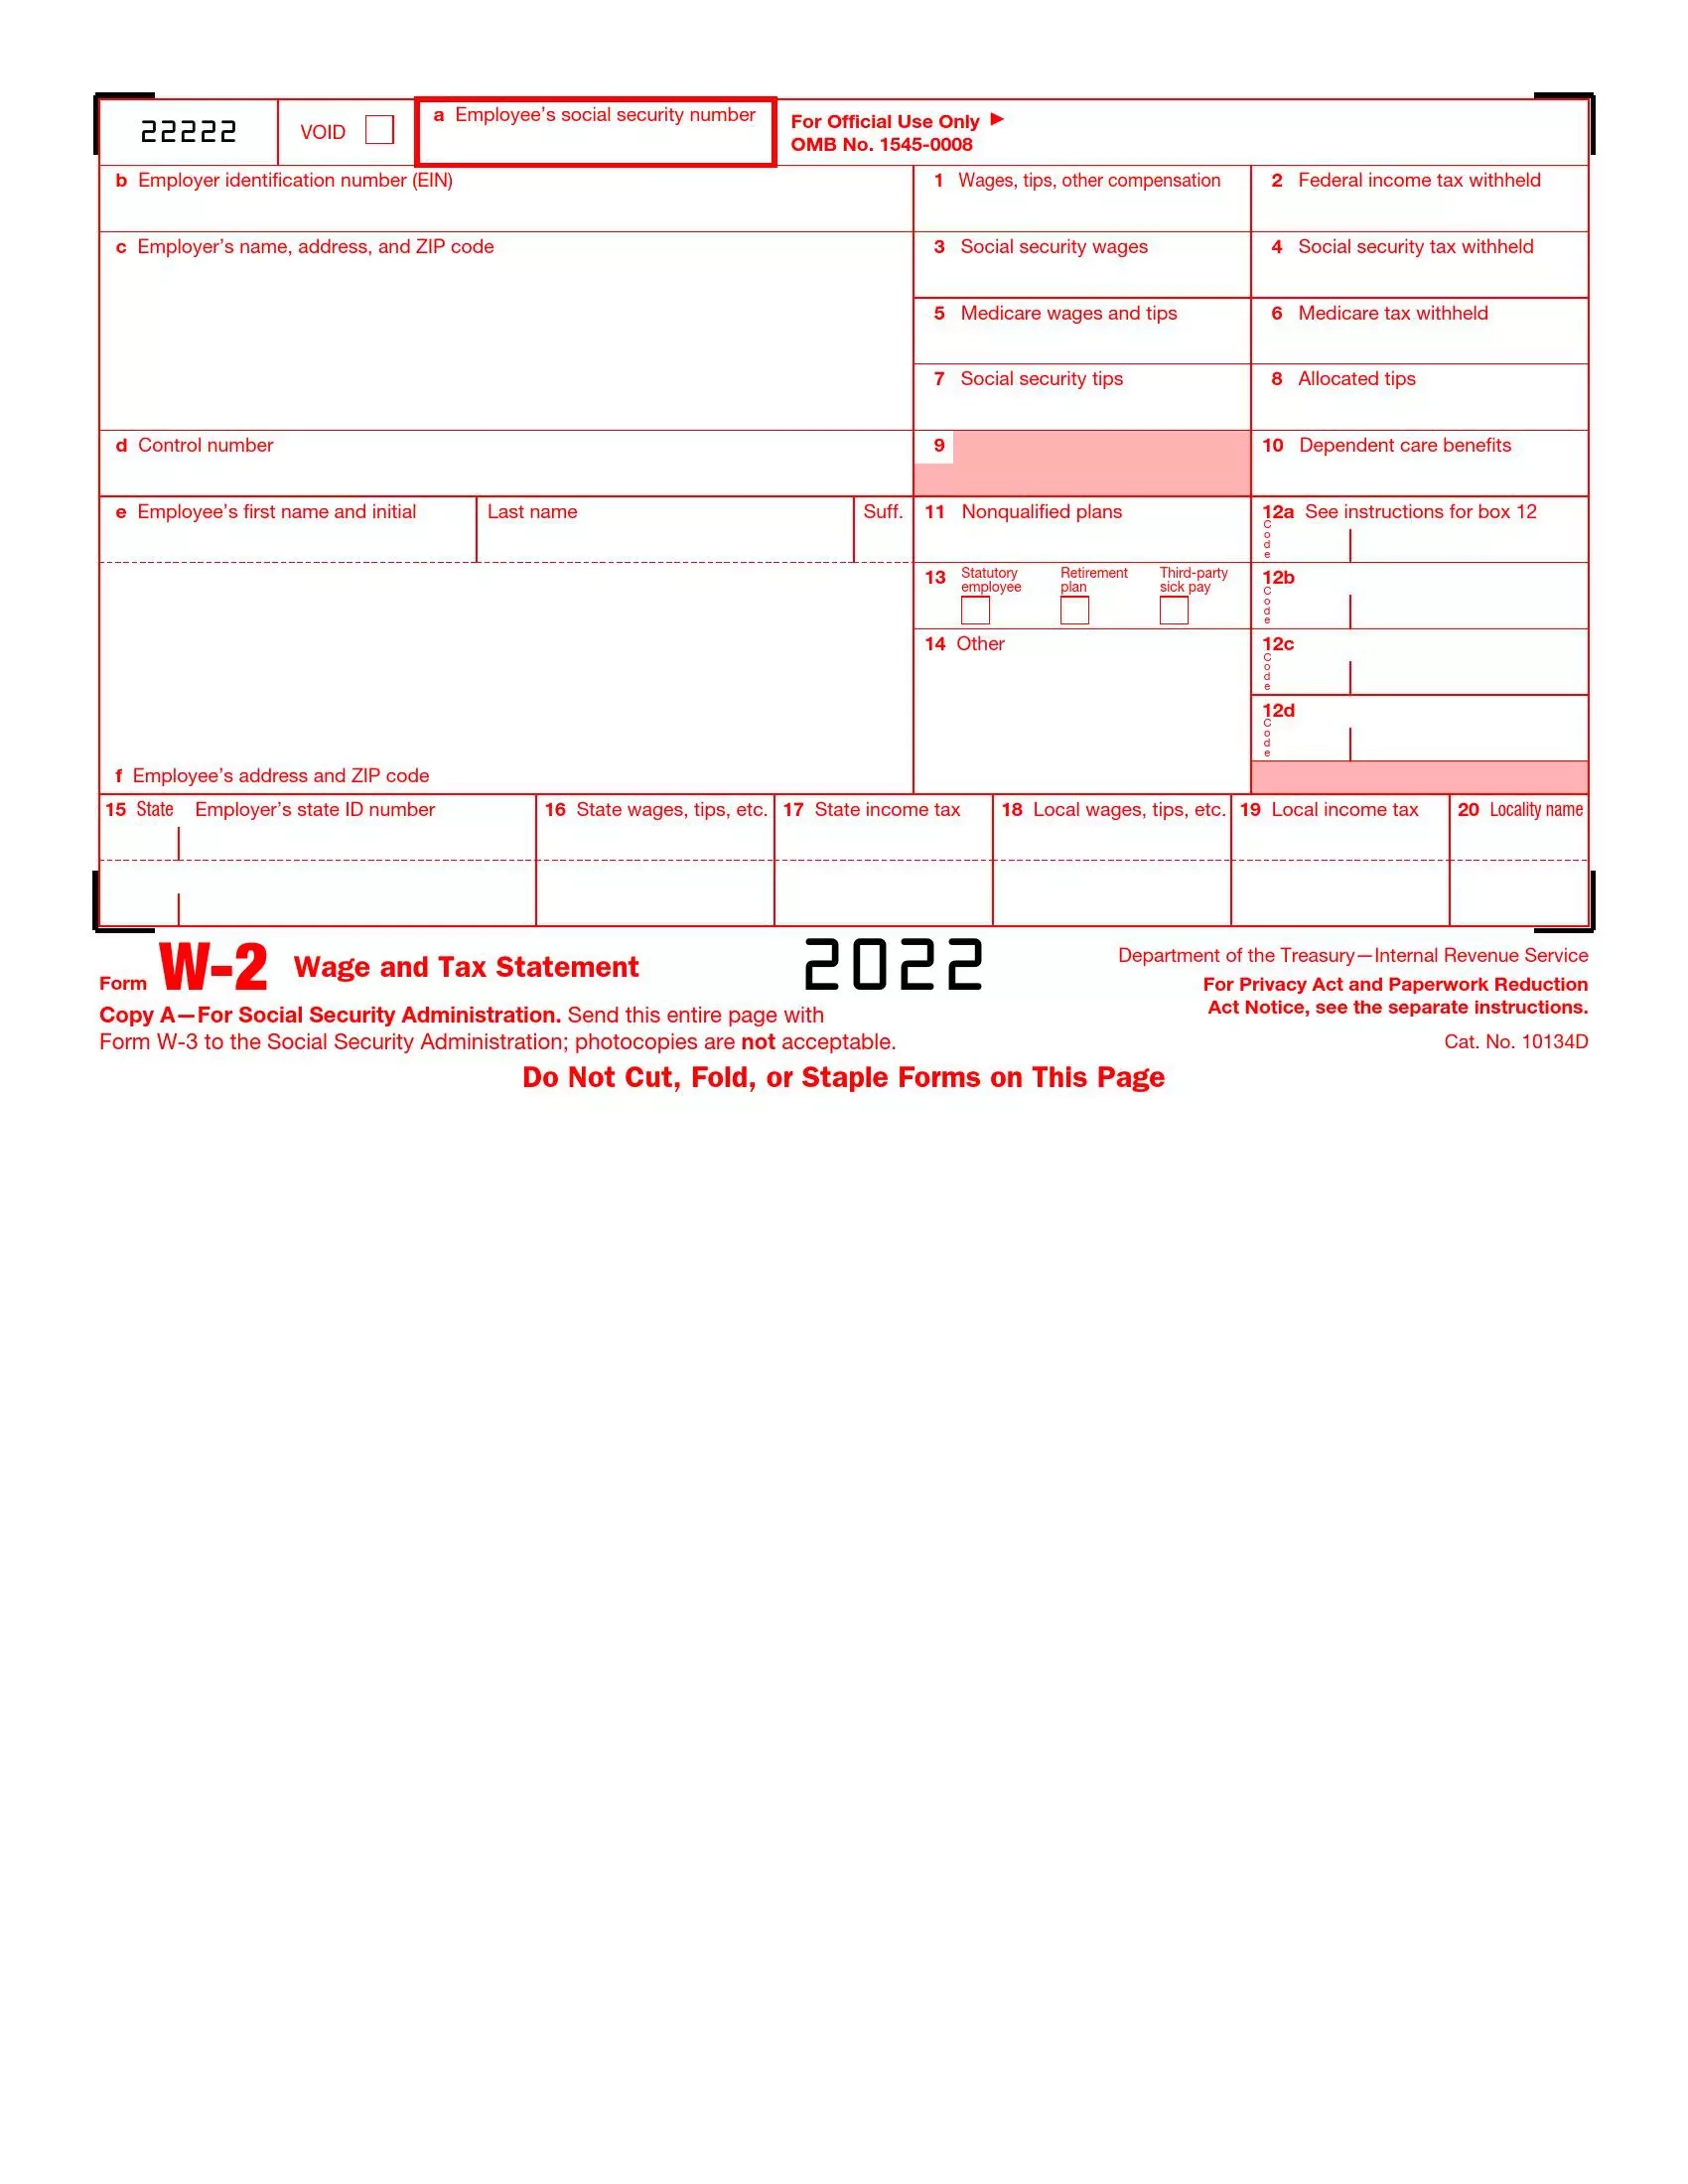 Irs Form W-2 ≡ Fill Out Printable Pdf Forms Online within W2 Form Printable